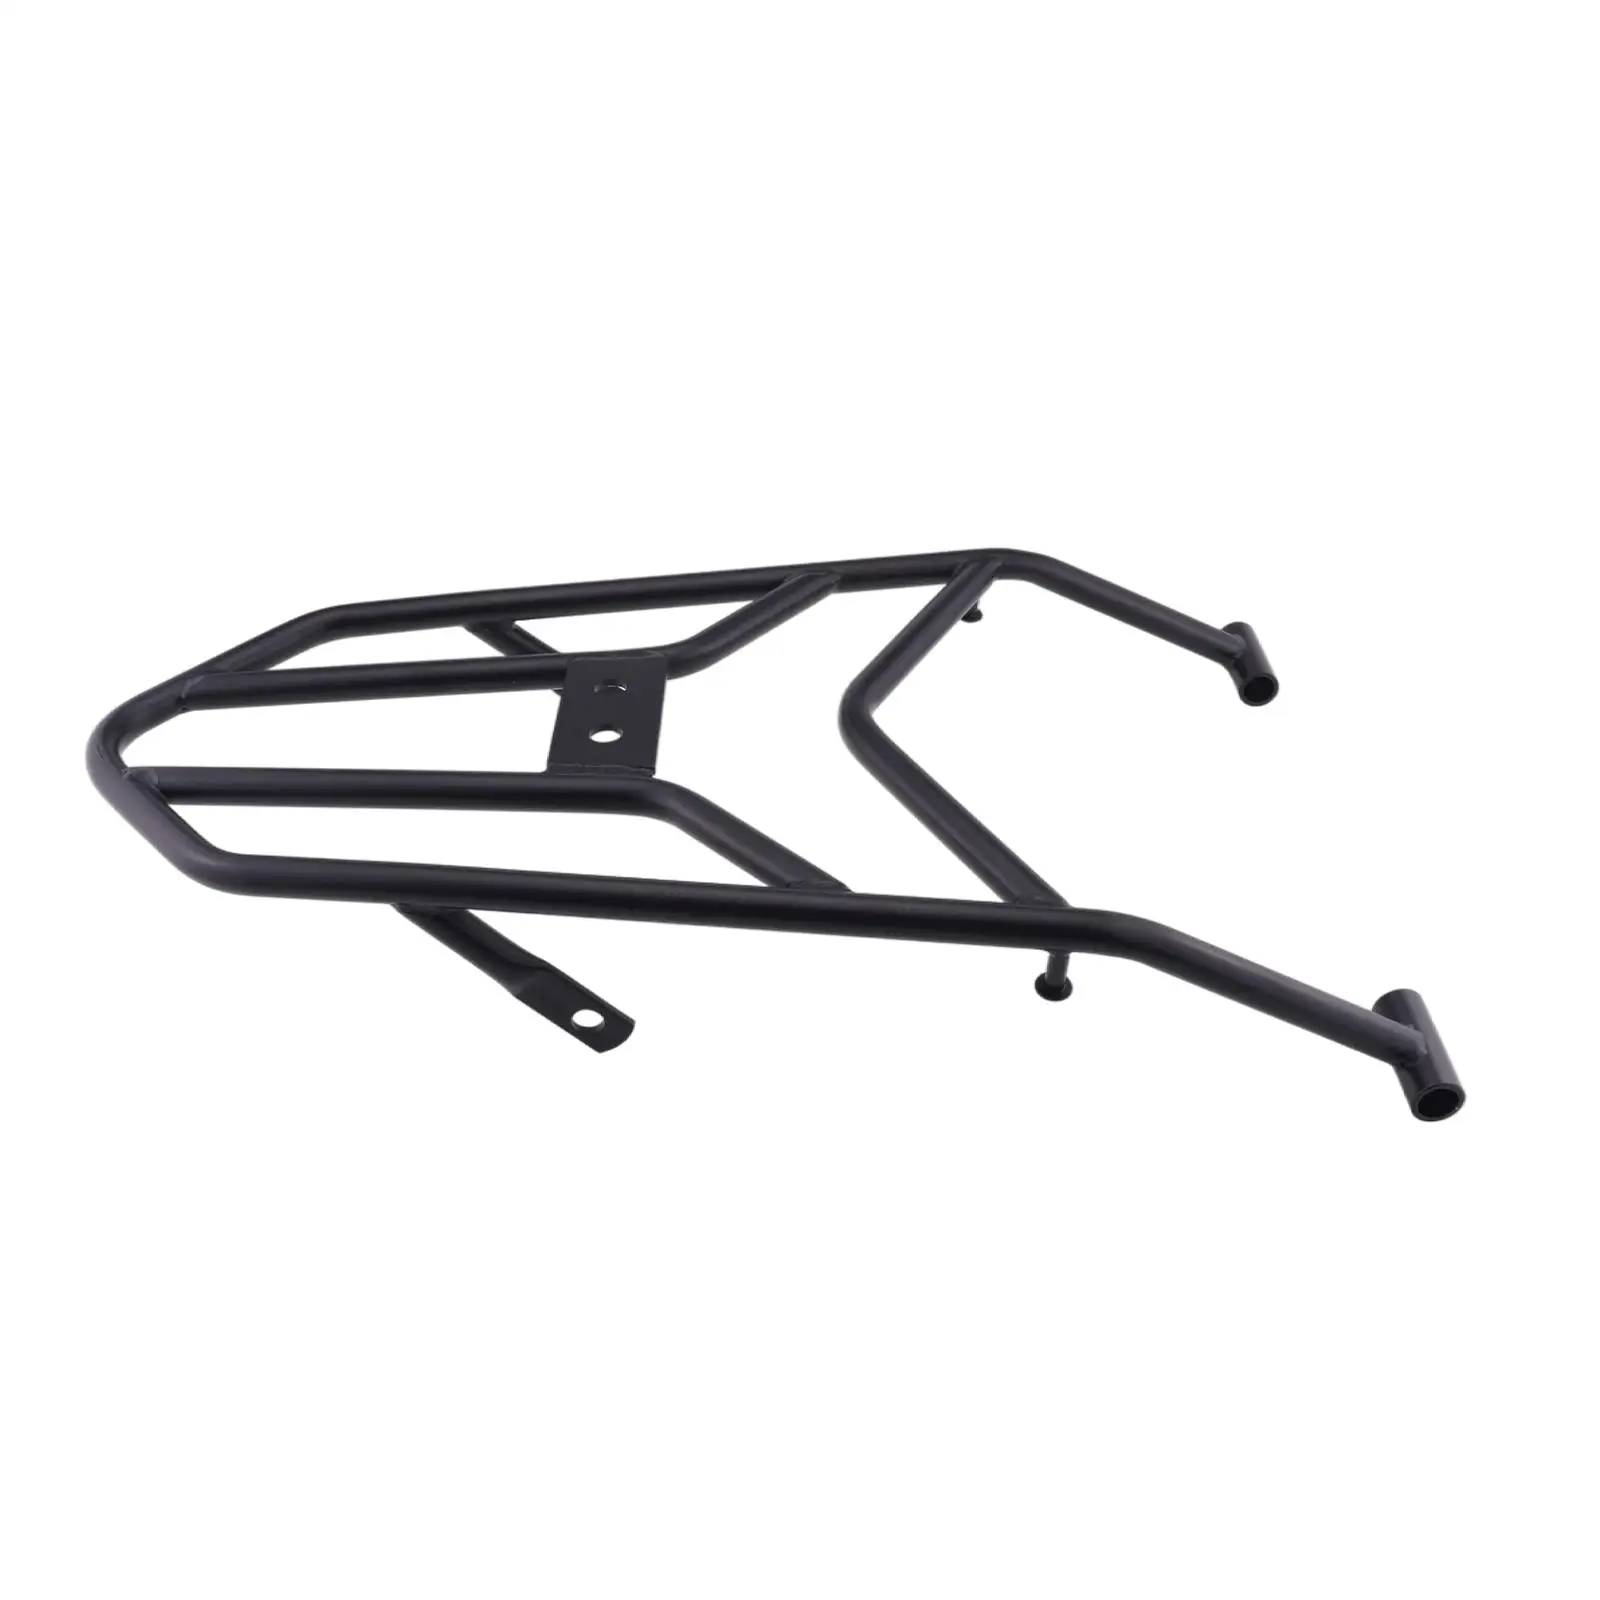 Motorcycle Rear Tail Rack Black Luggage Storage Rack Carrier for 